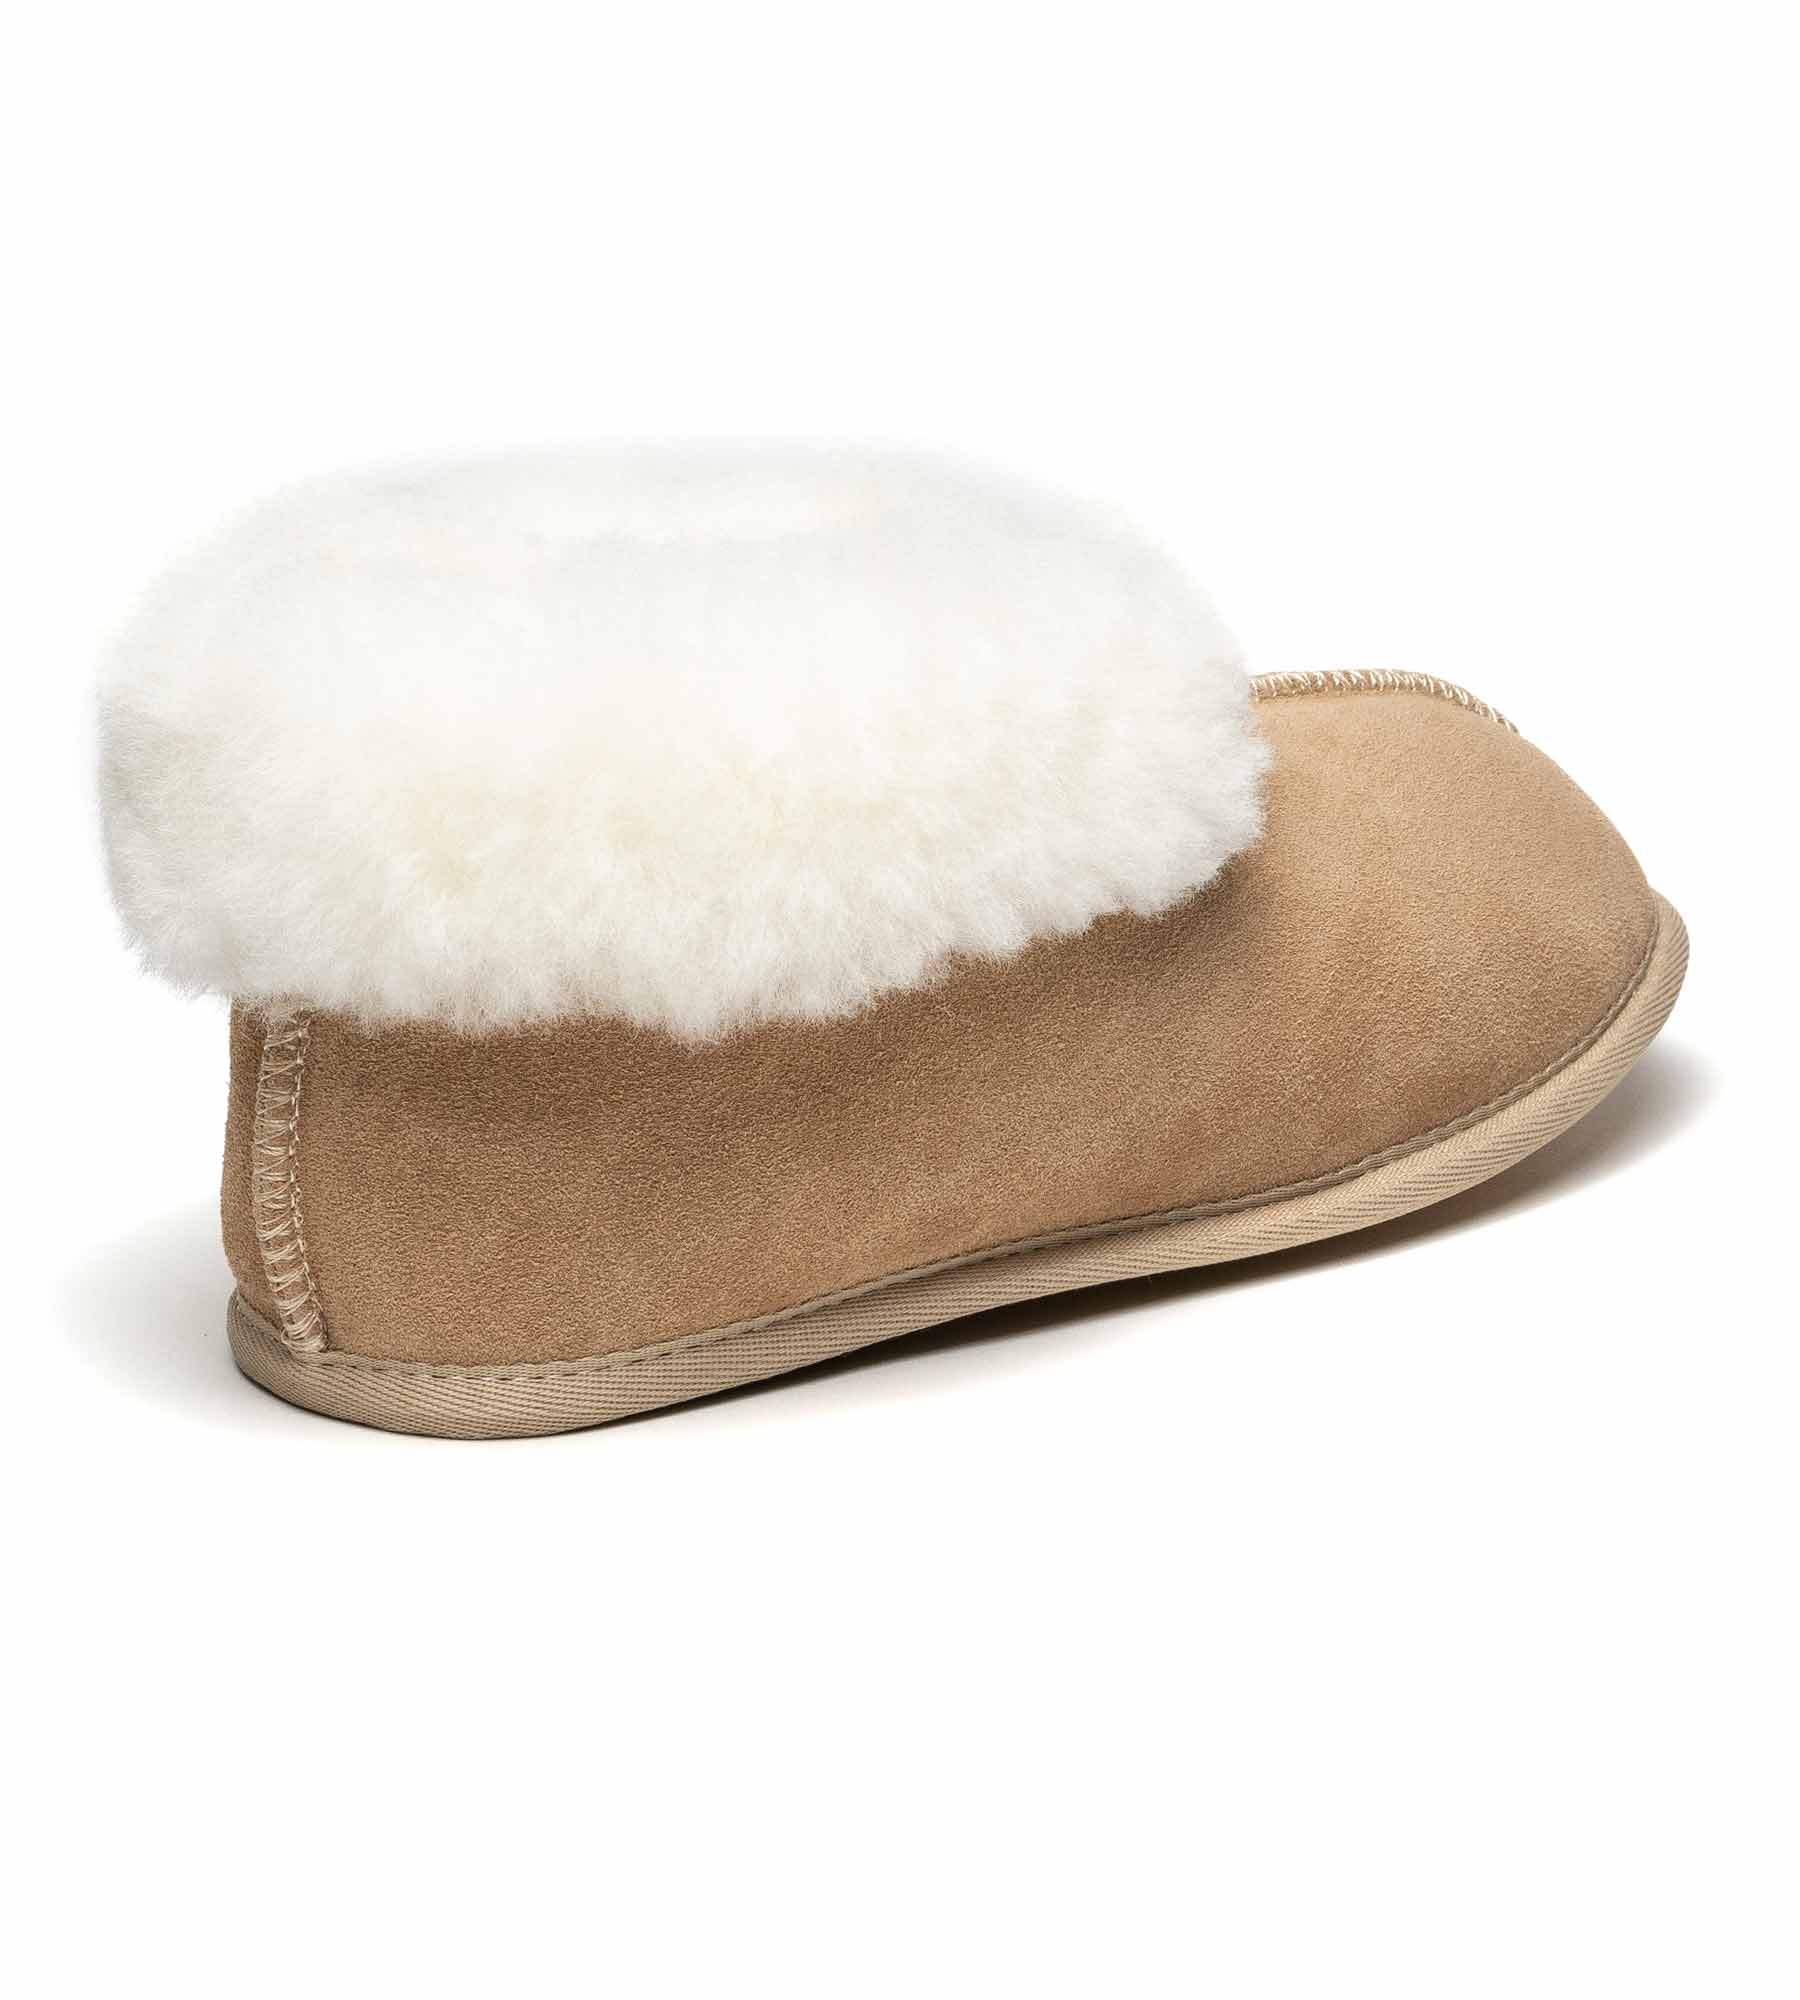 ECM002 Men's Sheepskin Slipper With Soft Suede Sole – Eastern Counties  Leather